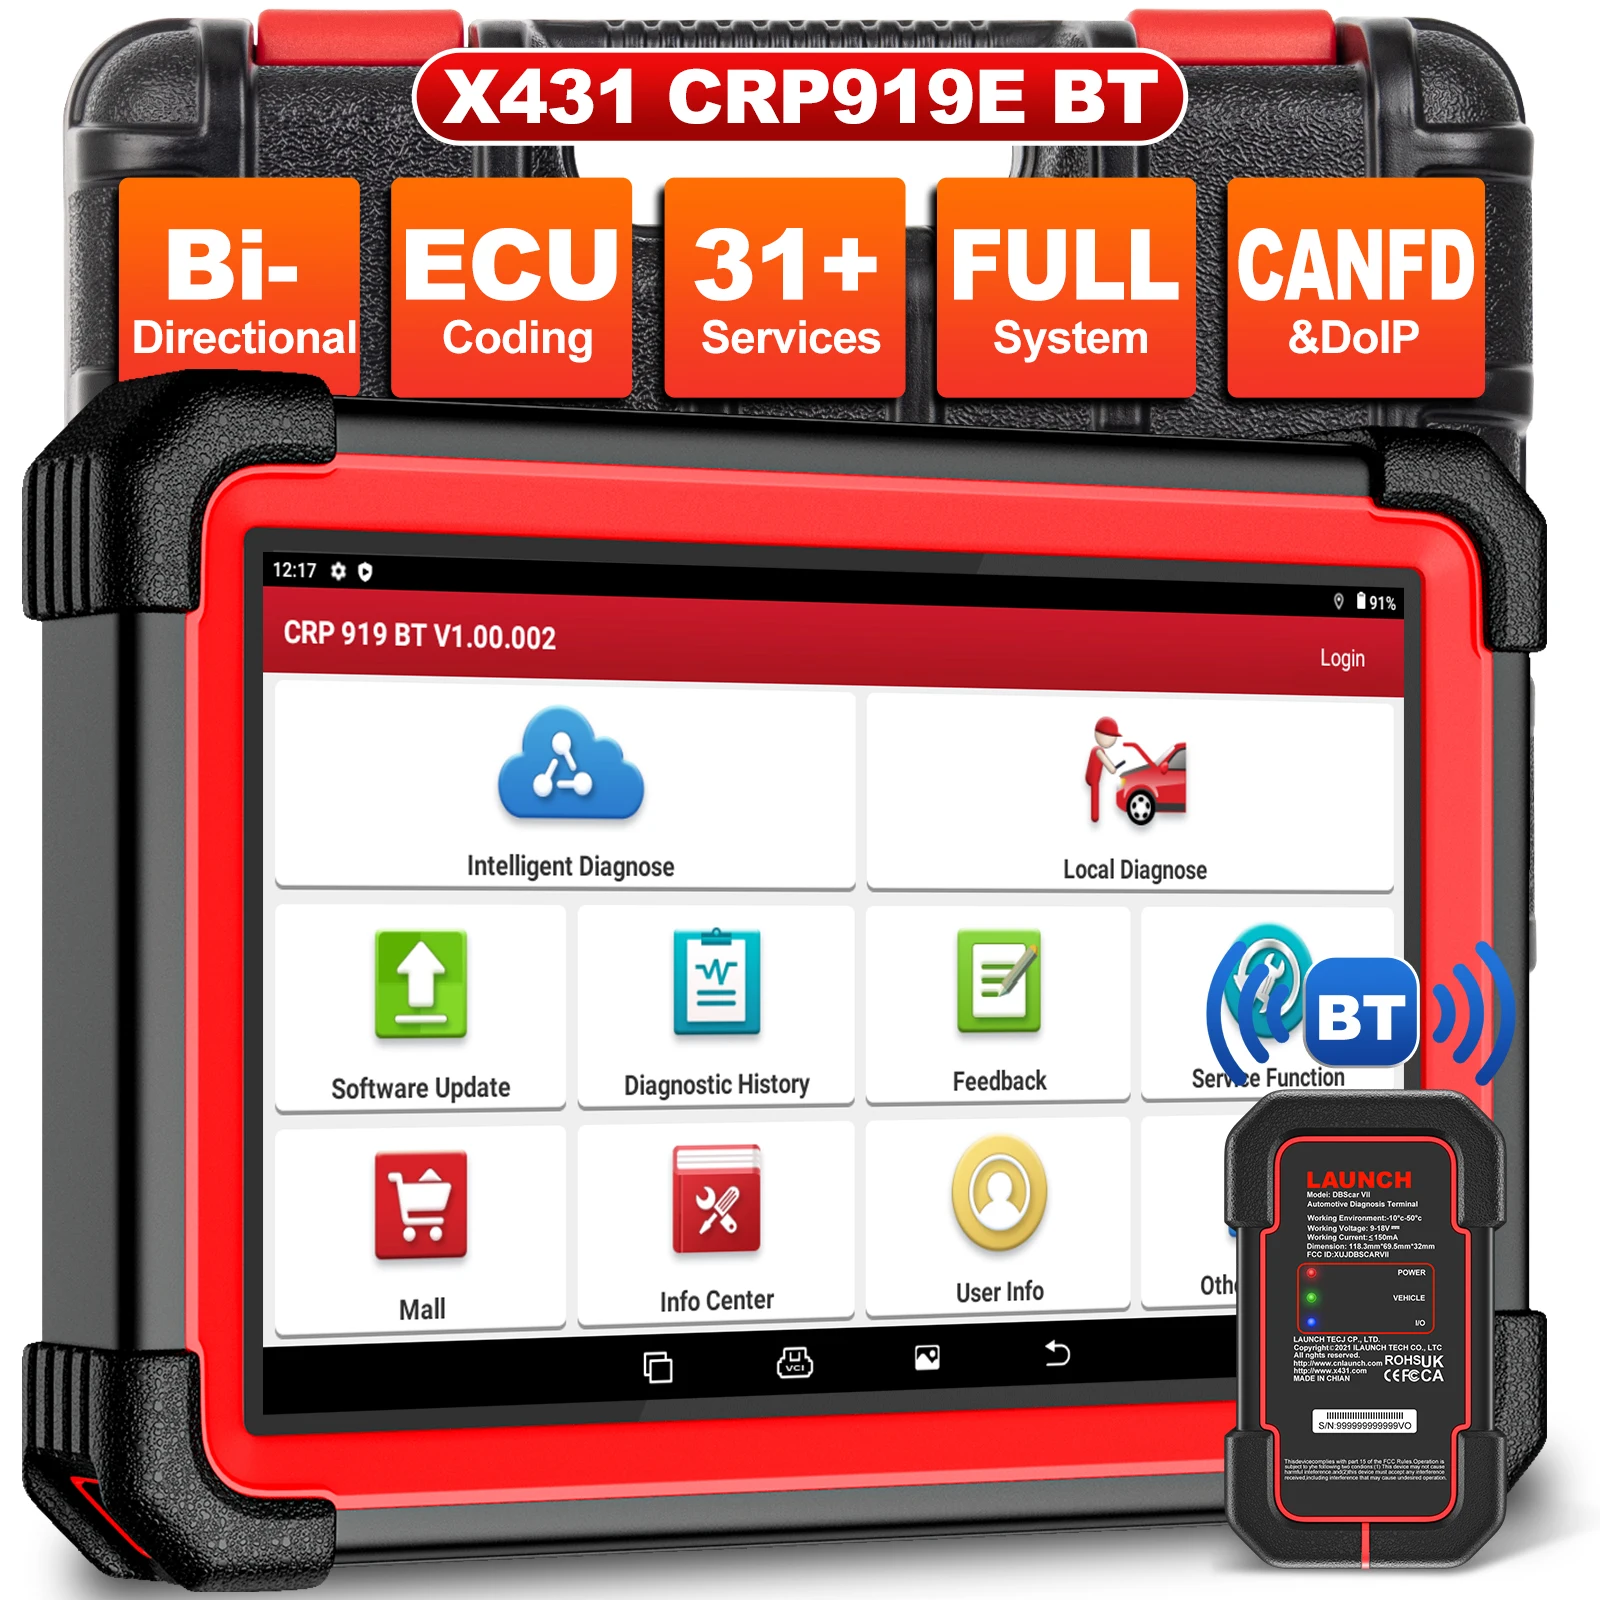 

LAUNCH X431 CRP919E Bluetooth BT Code Reader ALL System Diagnostic Tools ECU Coding Active Test AF IMMO 31 Resets OBDII